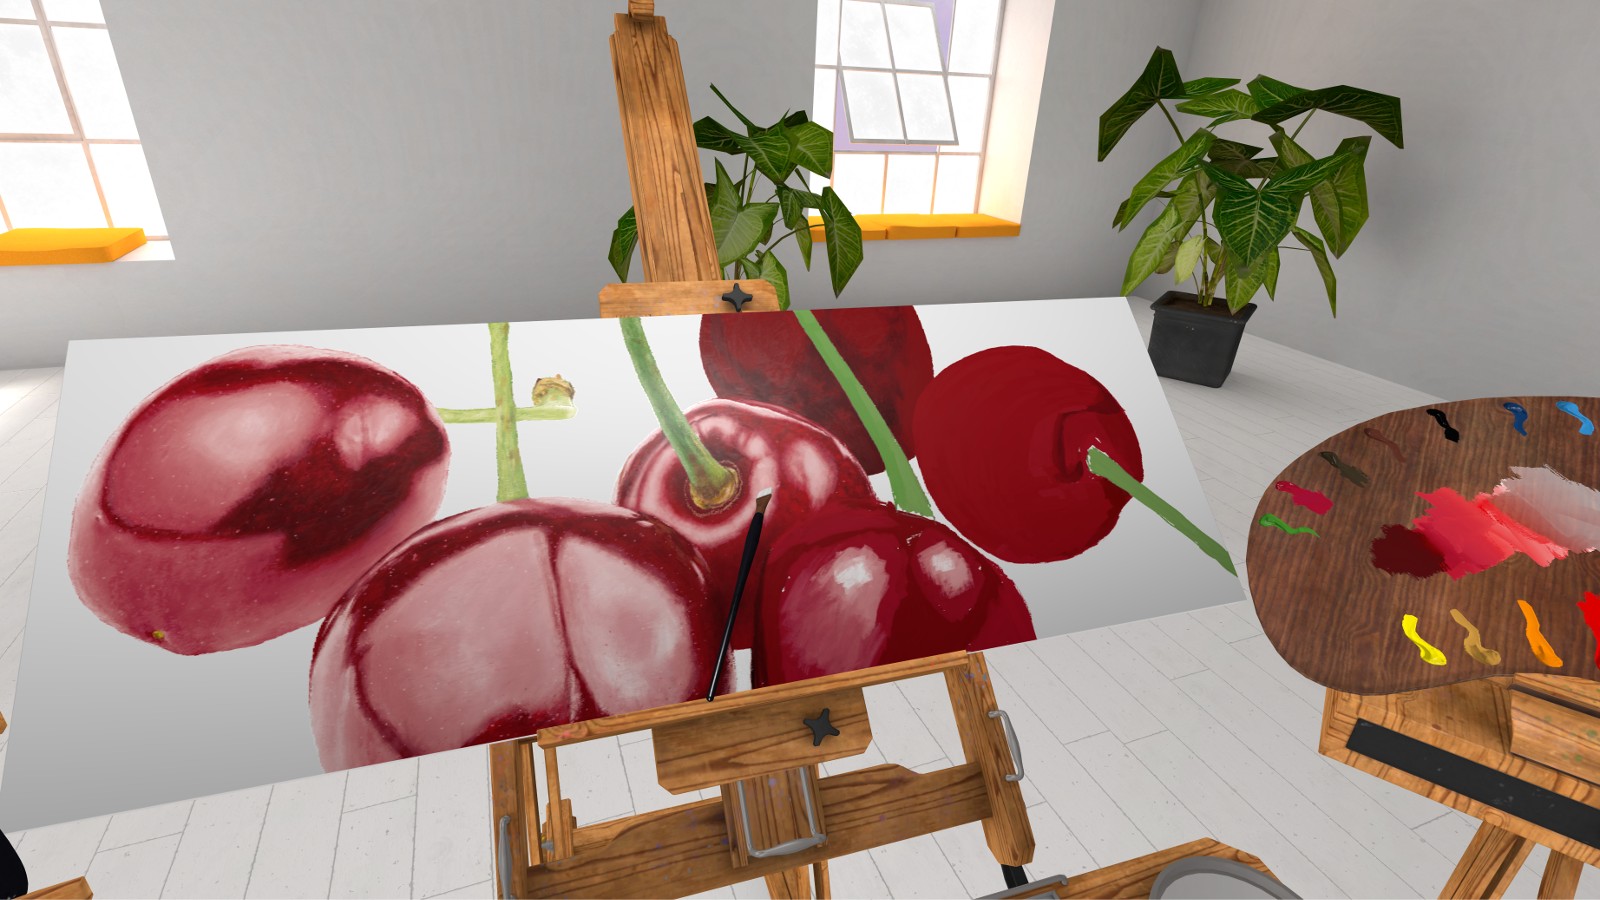 Still from the VR game Vermillion - VR Painting.